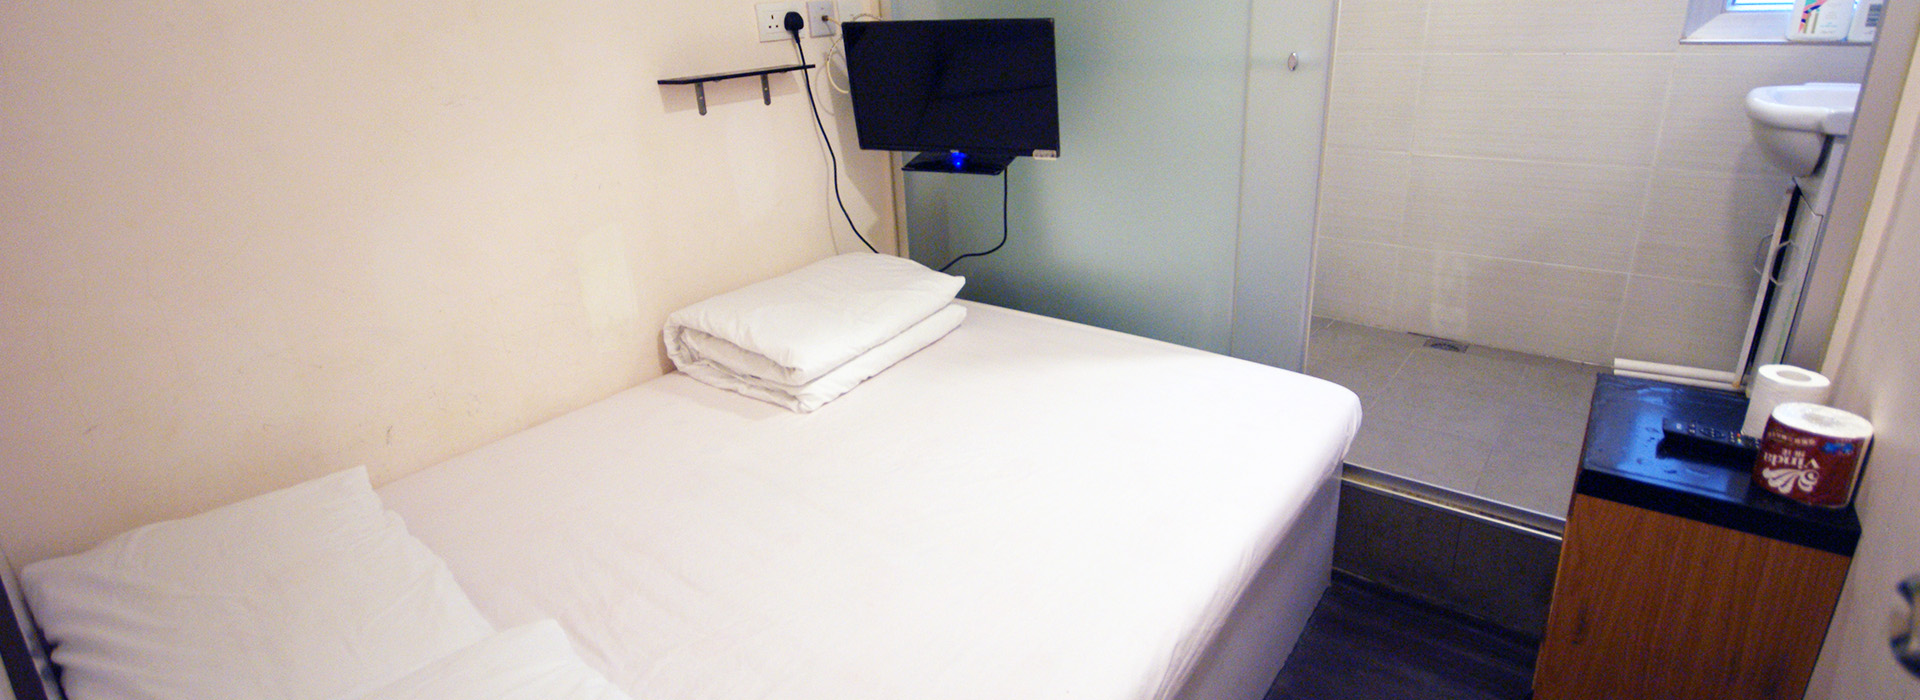 Oriental Hotel Kowloon Cheap Motel room monthly rental